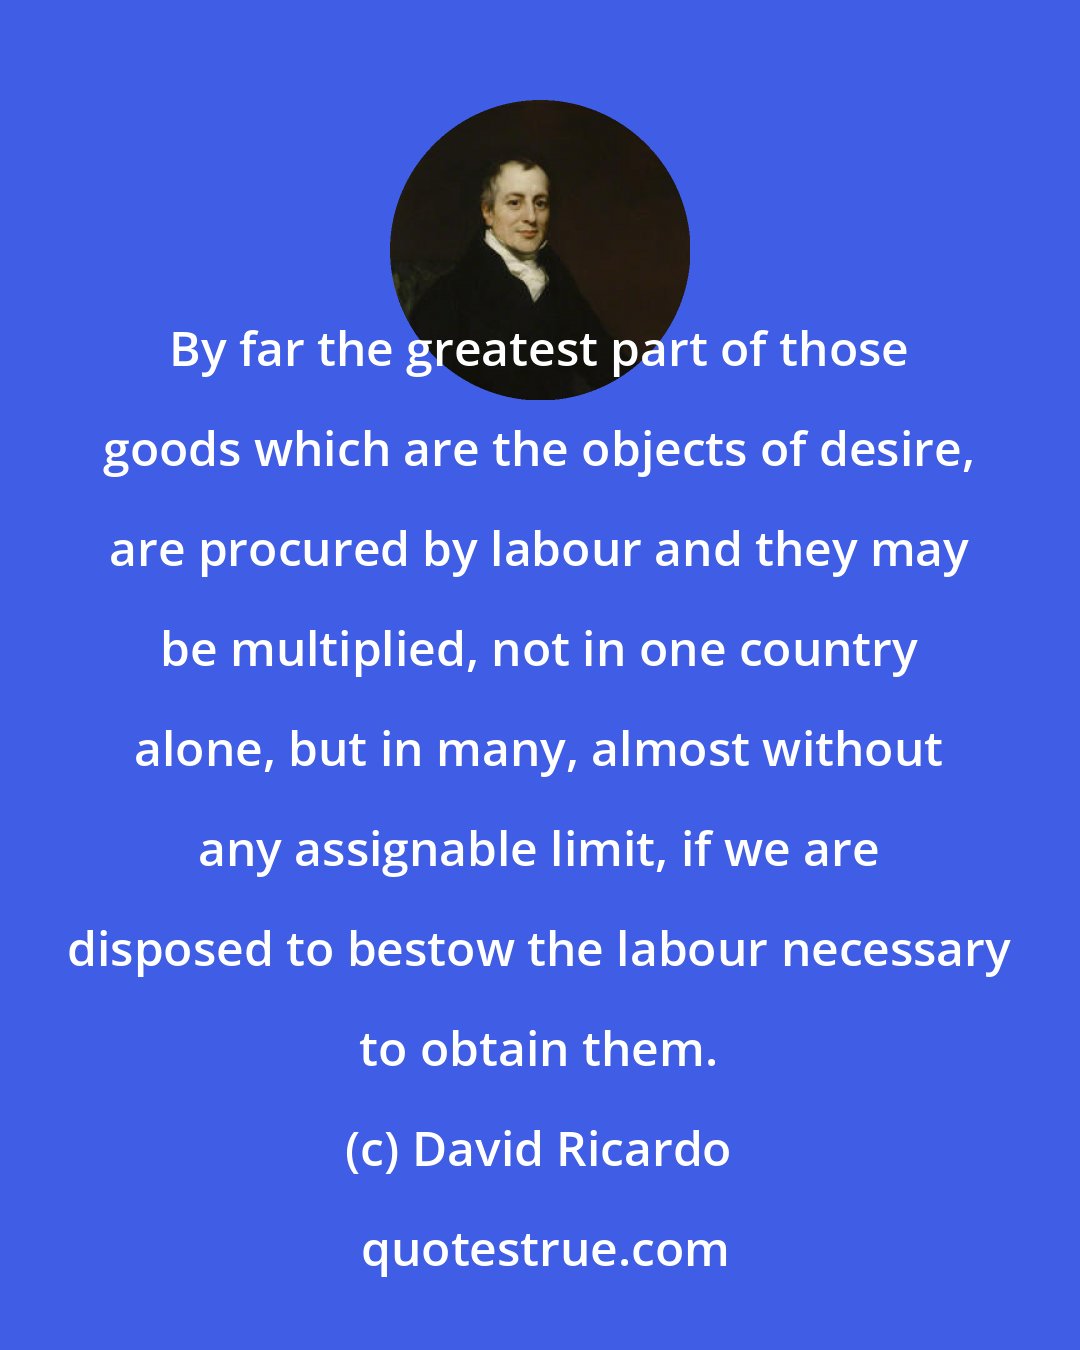 David Ricardo: By far the greatest part of those goods which are the objects of desire, are procured by labour and they may be multiplied, not in one country alone, but in many, almost without any assignable limit, if we are disposed to bestow the labour necessary to obtain them.